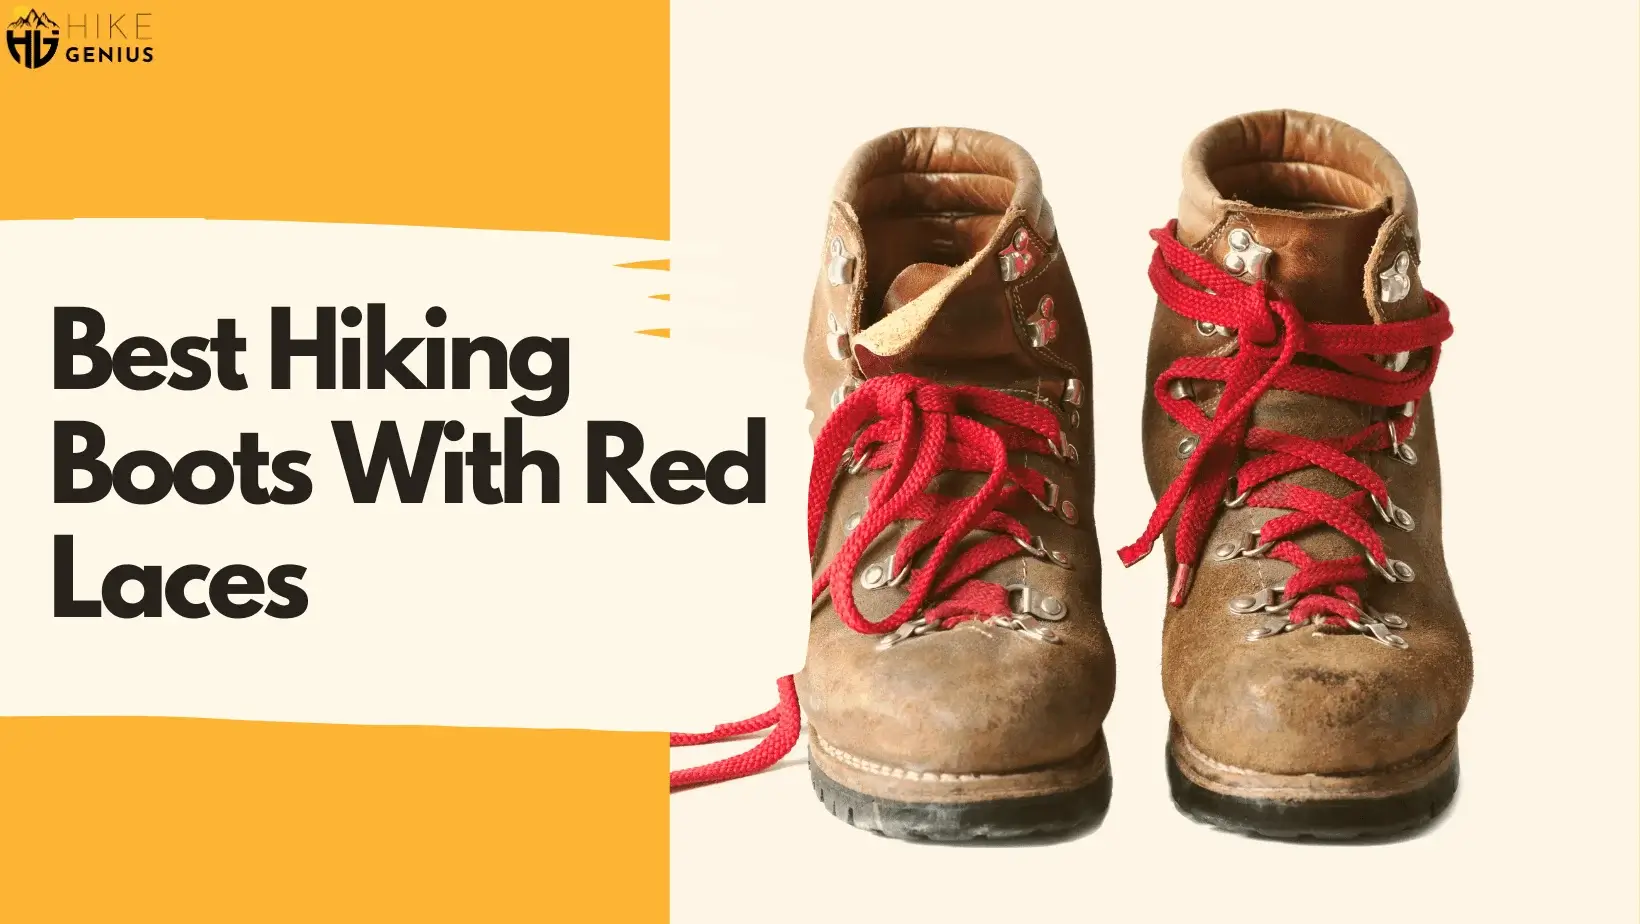 Exploring Hiking Boots with Red Laces: Why and Which Ones? - Hike Genius